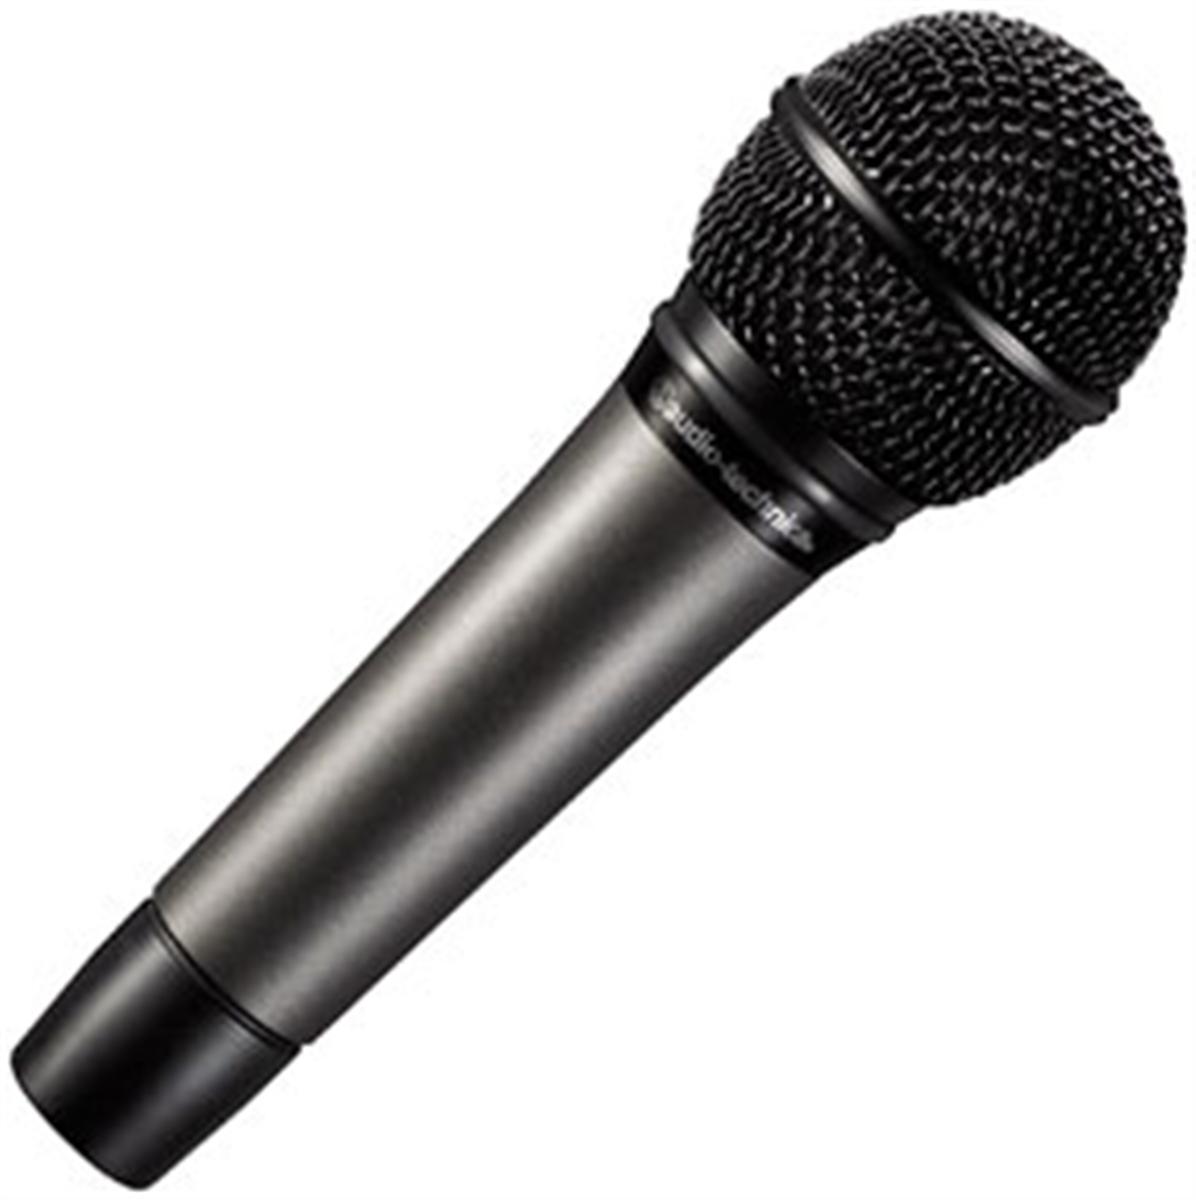 Microphone Clipart Black And White   Clipart Panda   Free Clipart